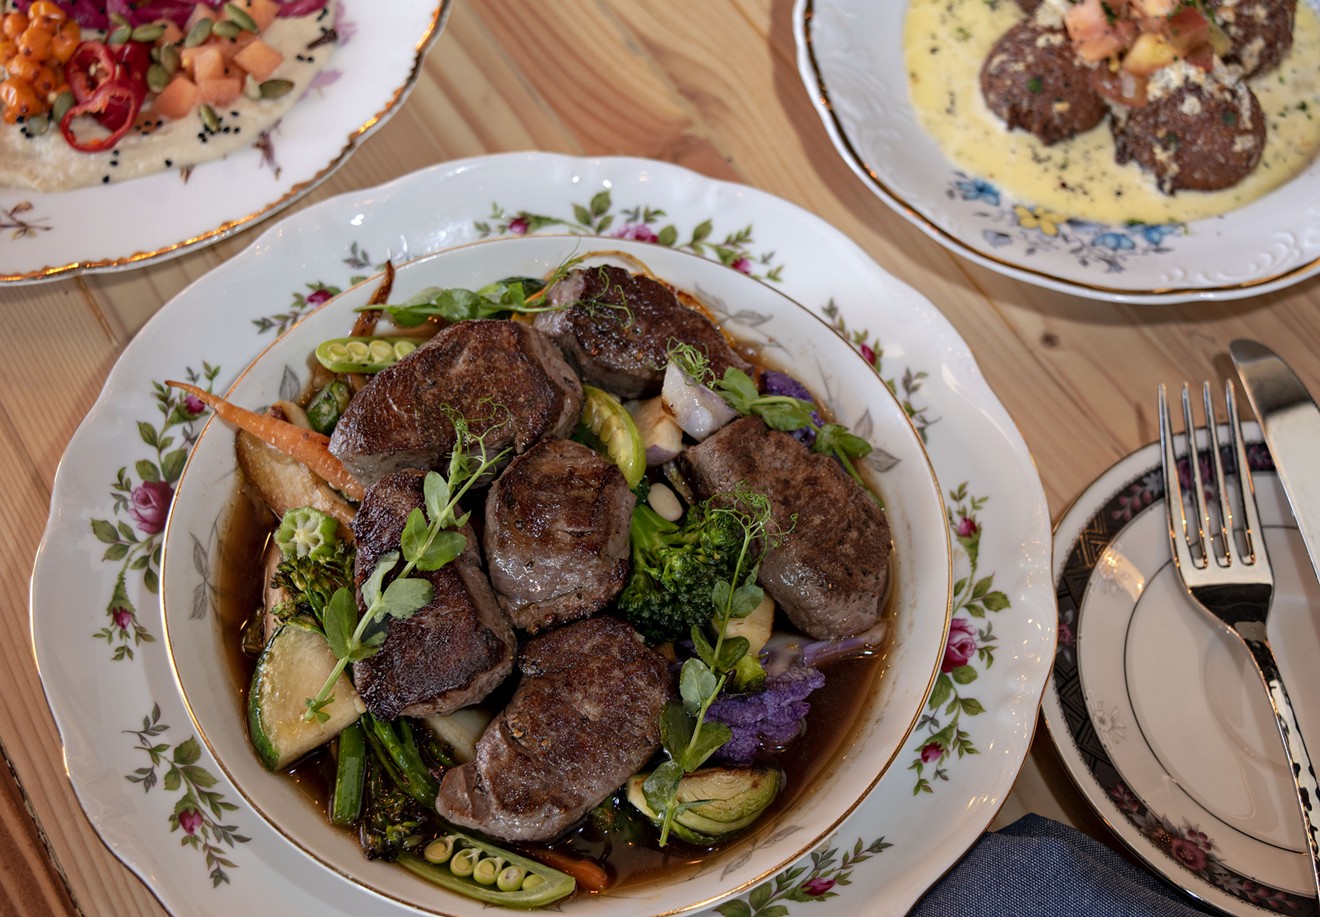 Venison medallions cooked in a cast-iron skillet are among the stars at Cotton & Copper.